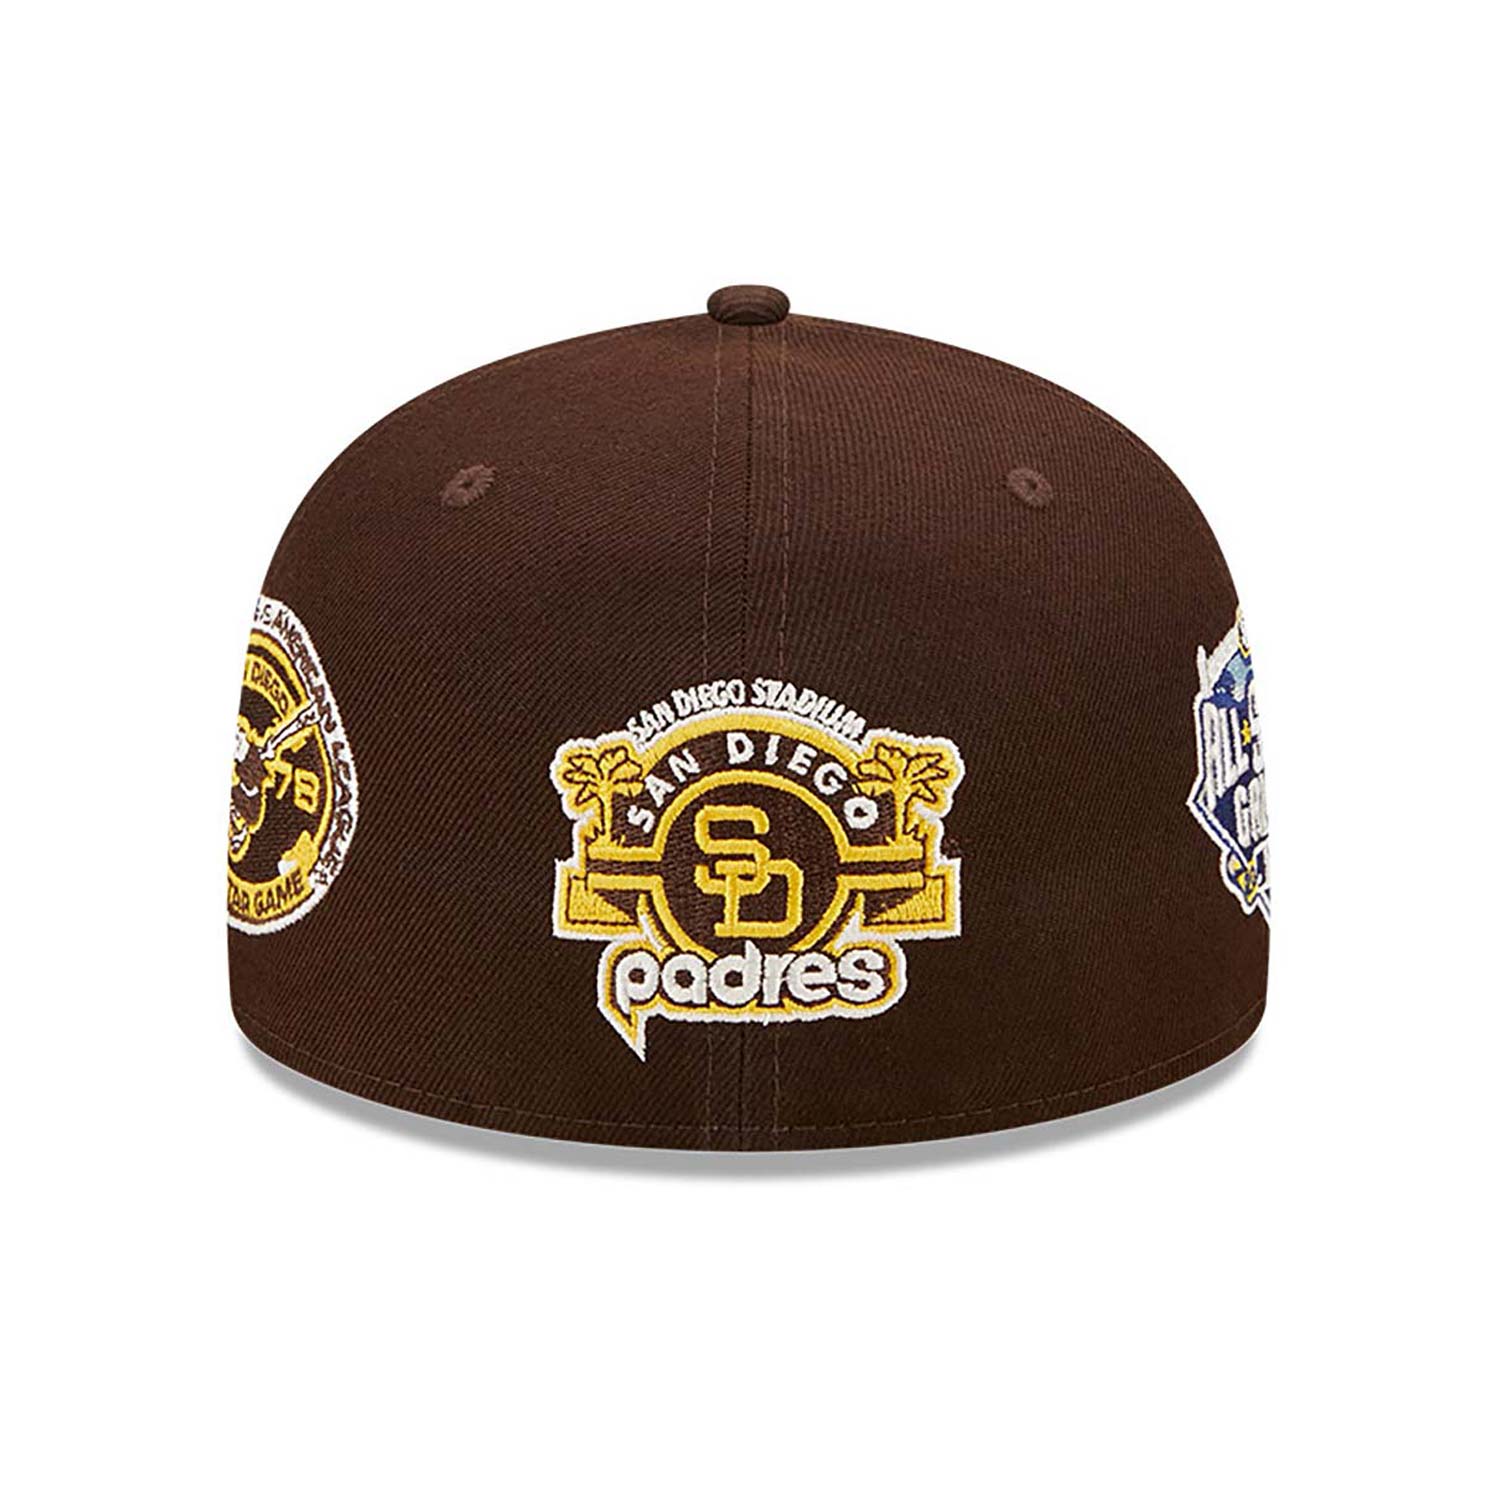 San Diego Padres Cooperstown Multi Patch Brown 59FIFTY Fitted Cap